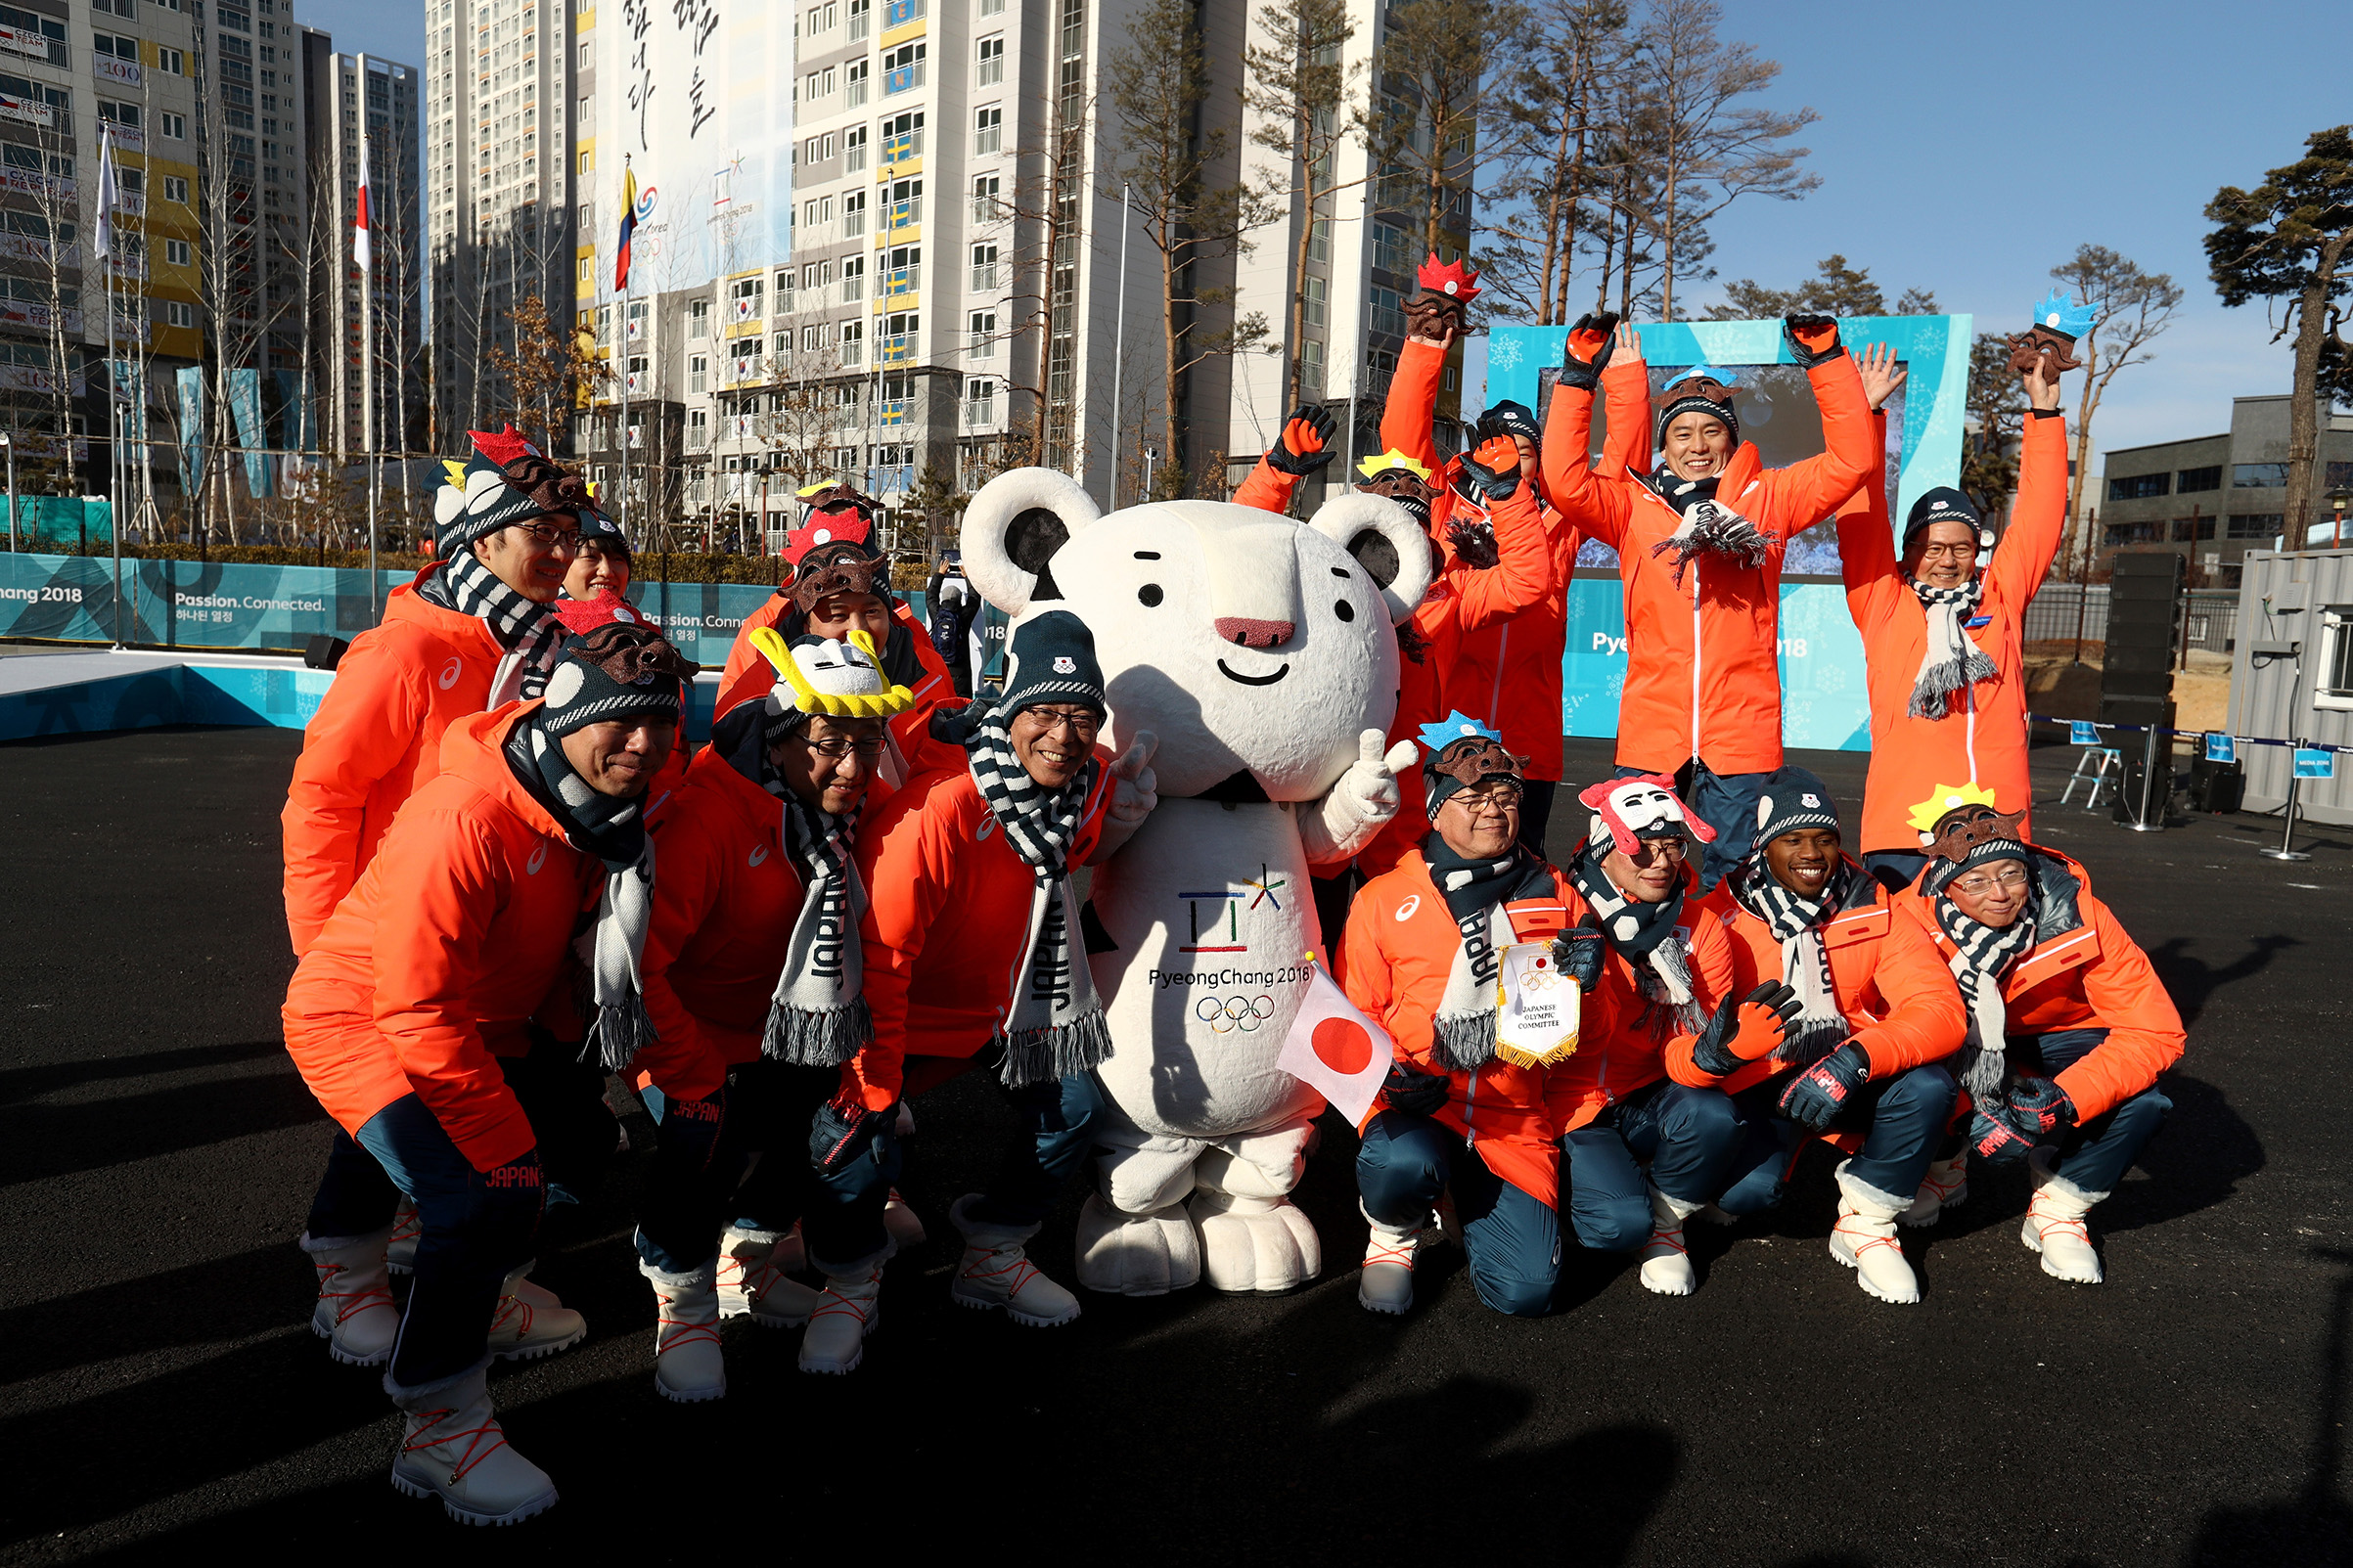 Members of the Japan team pose with mascot Soohorang ahead of the PyeongChang 2018 Winter Olympic Games on Feb. 7, 2018. (Robert Cianflone—Getty Images)